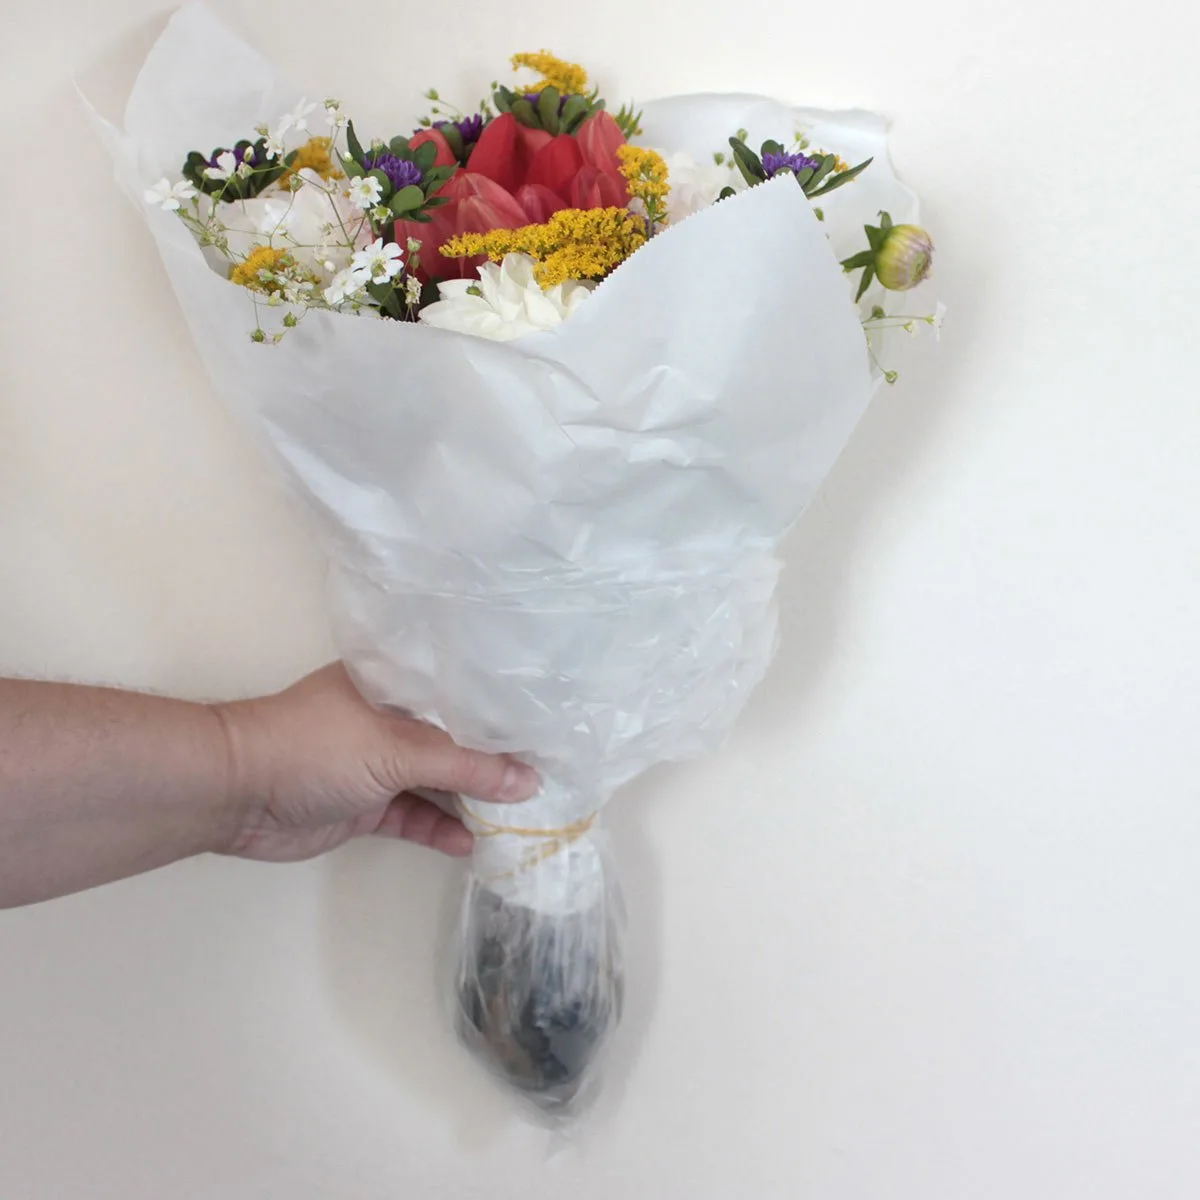 How to package a bouquet of cut flowers that will last for days